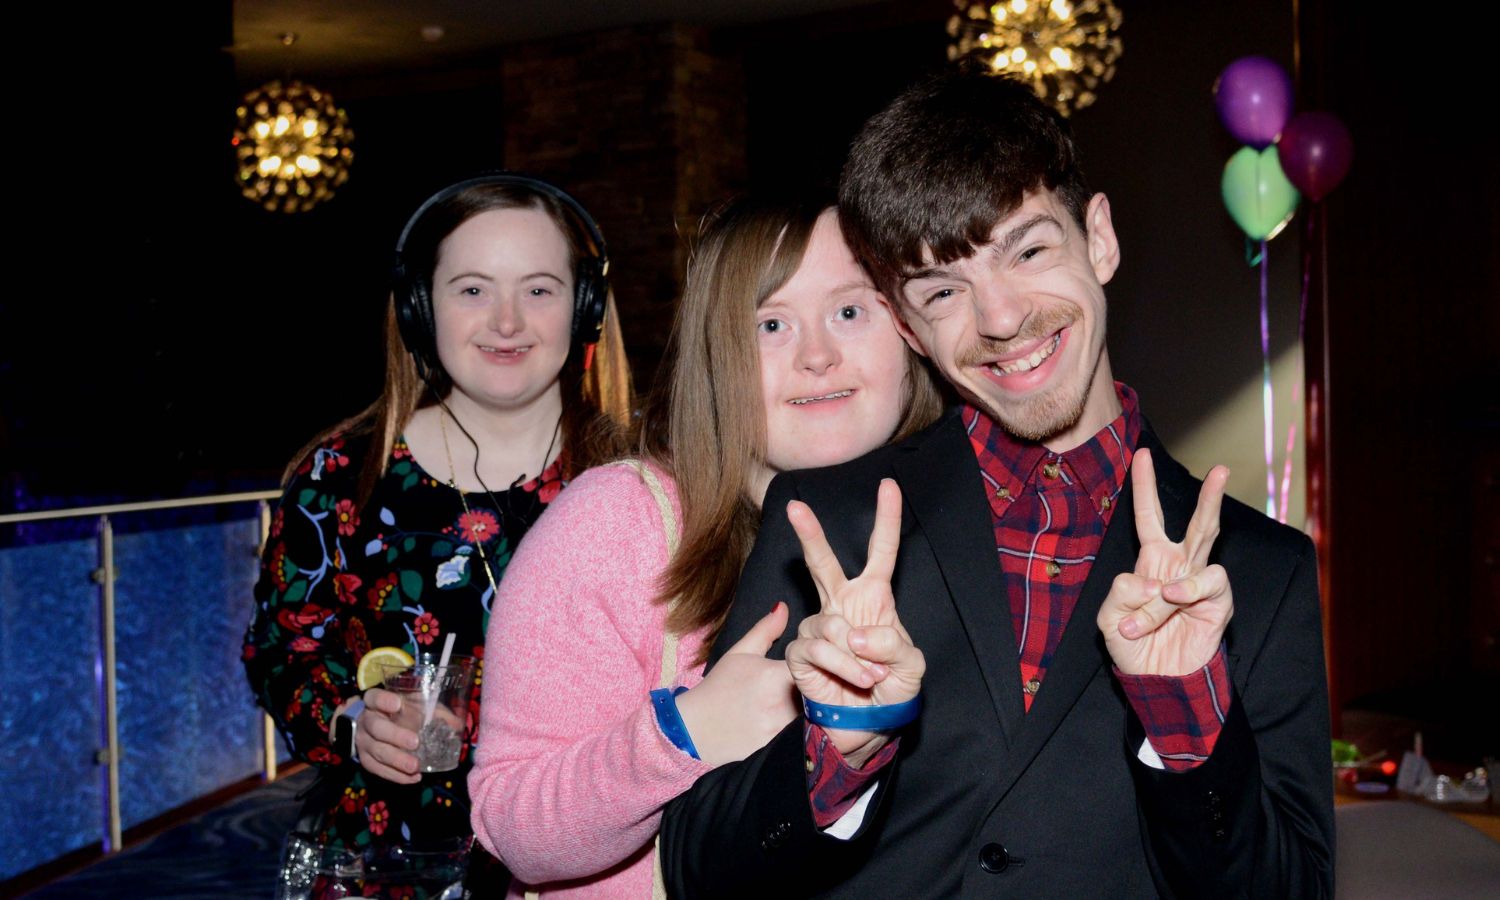 Three people together, one holding up peace signs and another wearing headphones